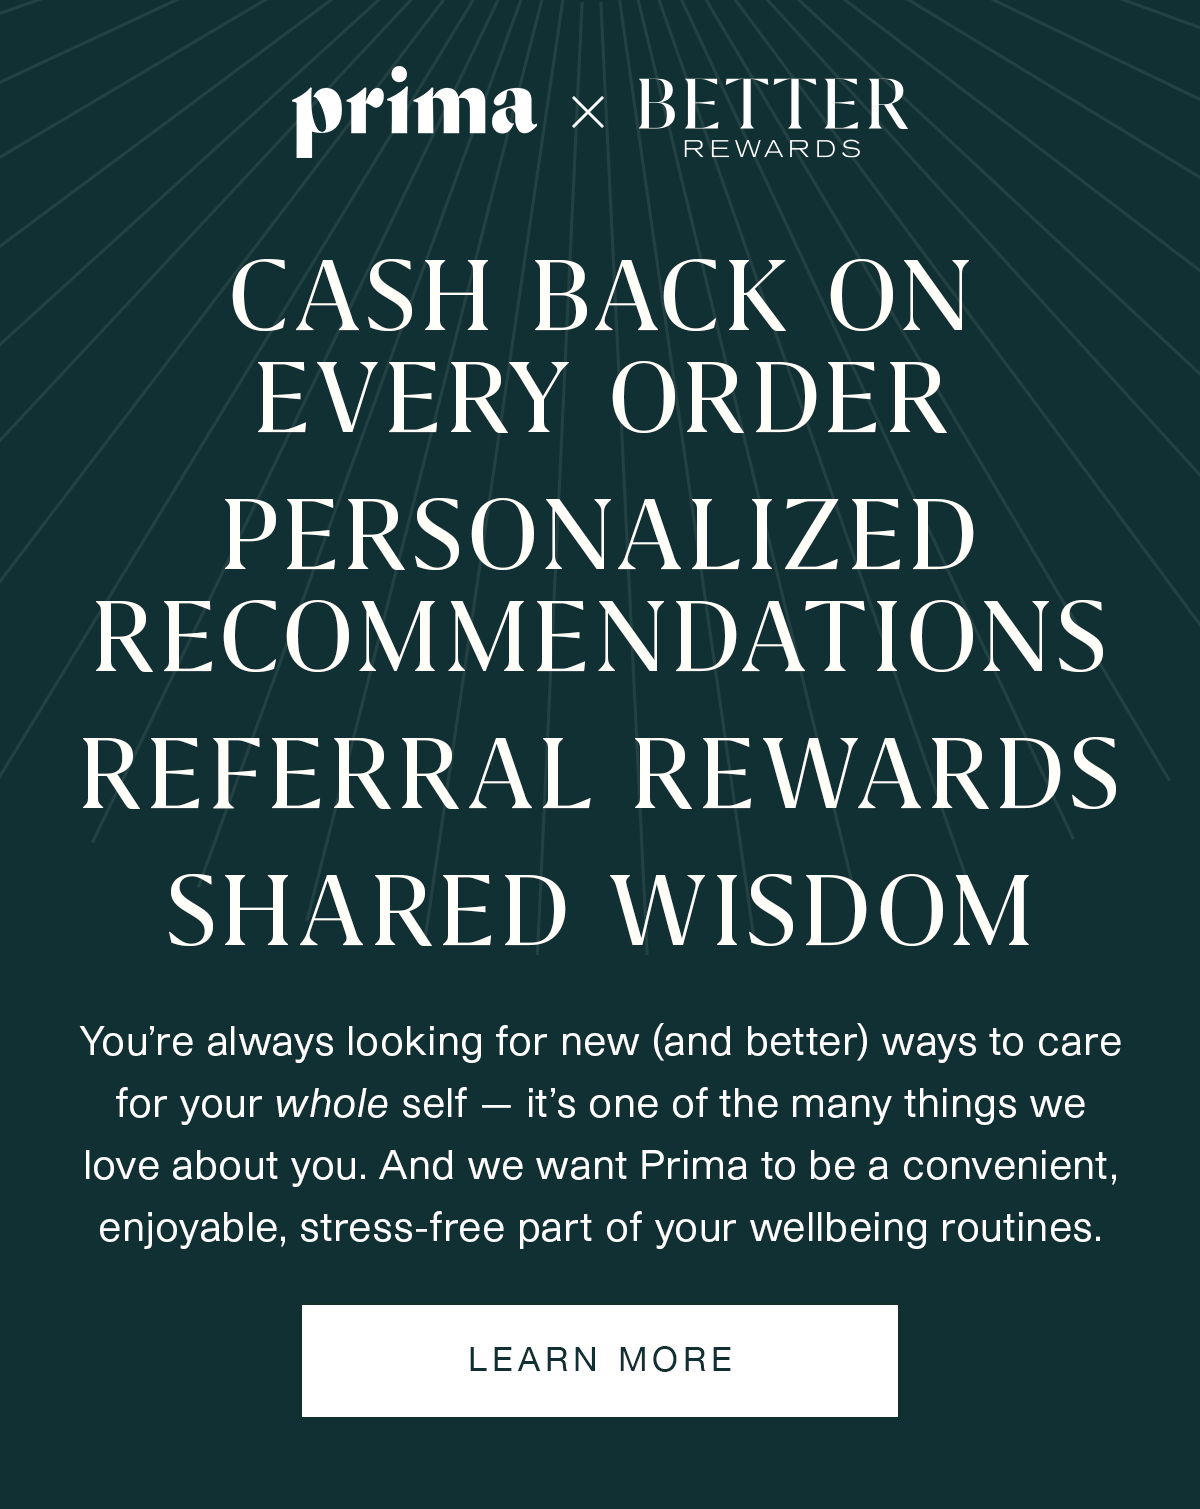 Prima x Better Rewards | CASH BACK ON EVERY ORDER | PERSONALIZED RECOMMENDATIONS | REFERRAL REWARDS | SHARED WISDOM | You’re always looking for new (and better) ways to care for your whole self — it’s one of the many things we love about you. And we want Prima to be a convenient, enjoyable, stress-free part of your wellbeing routines. | LEARN MORE